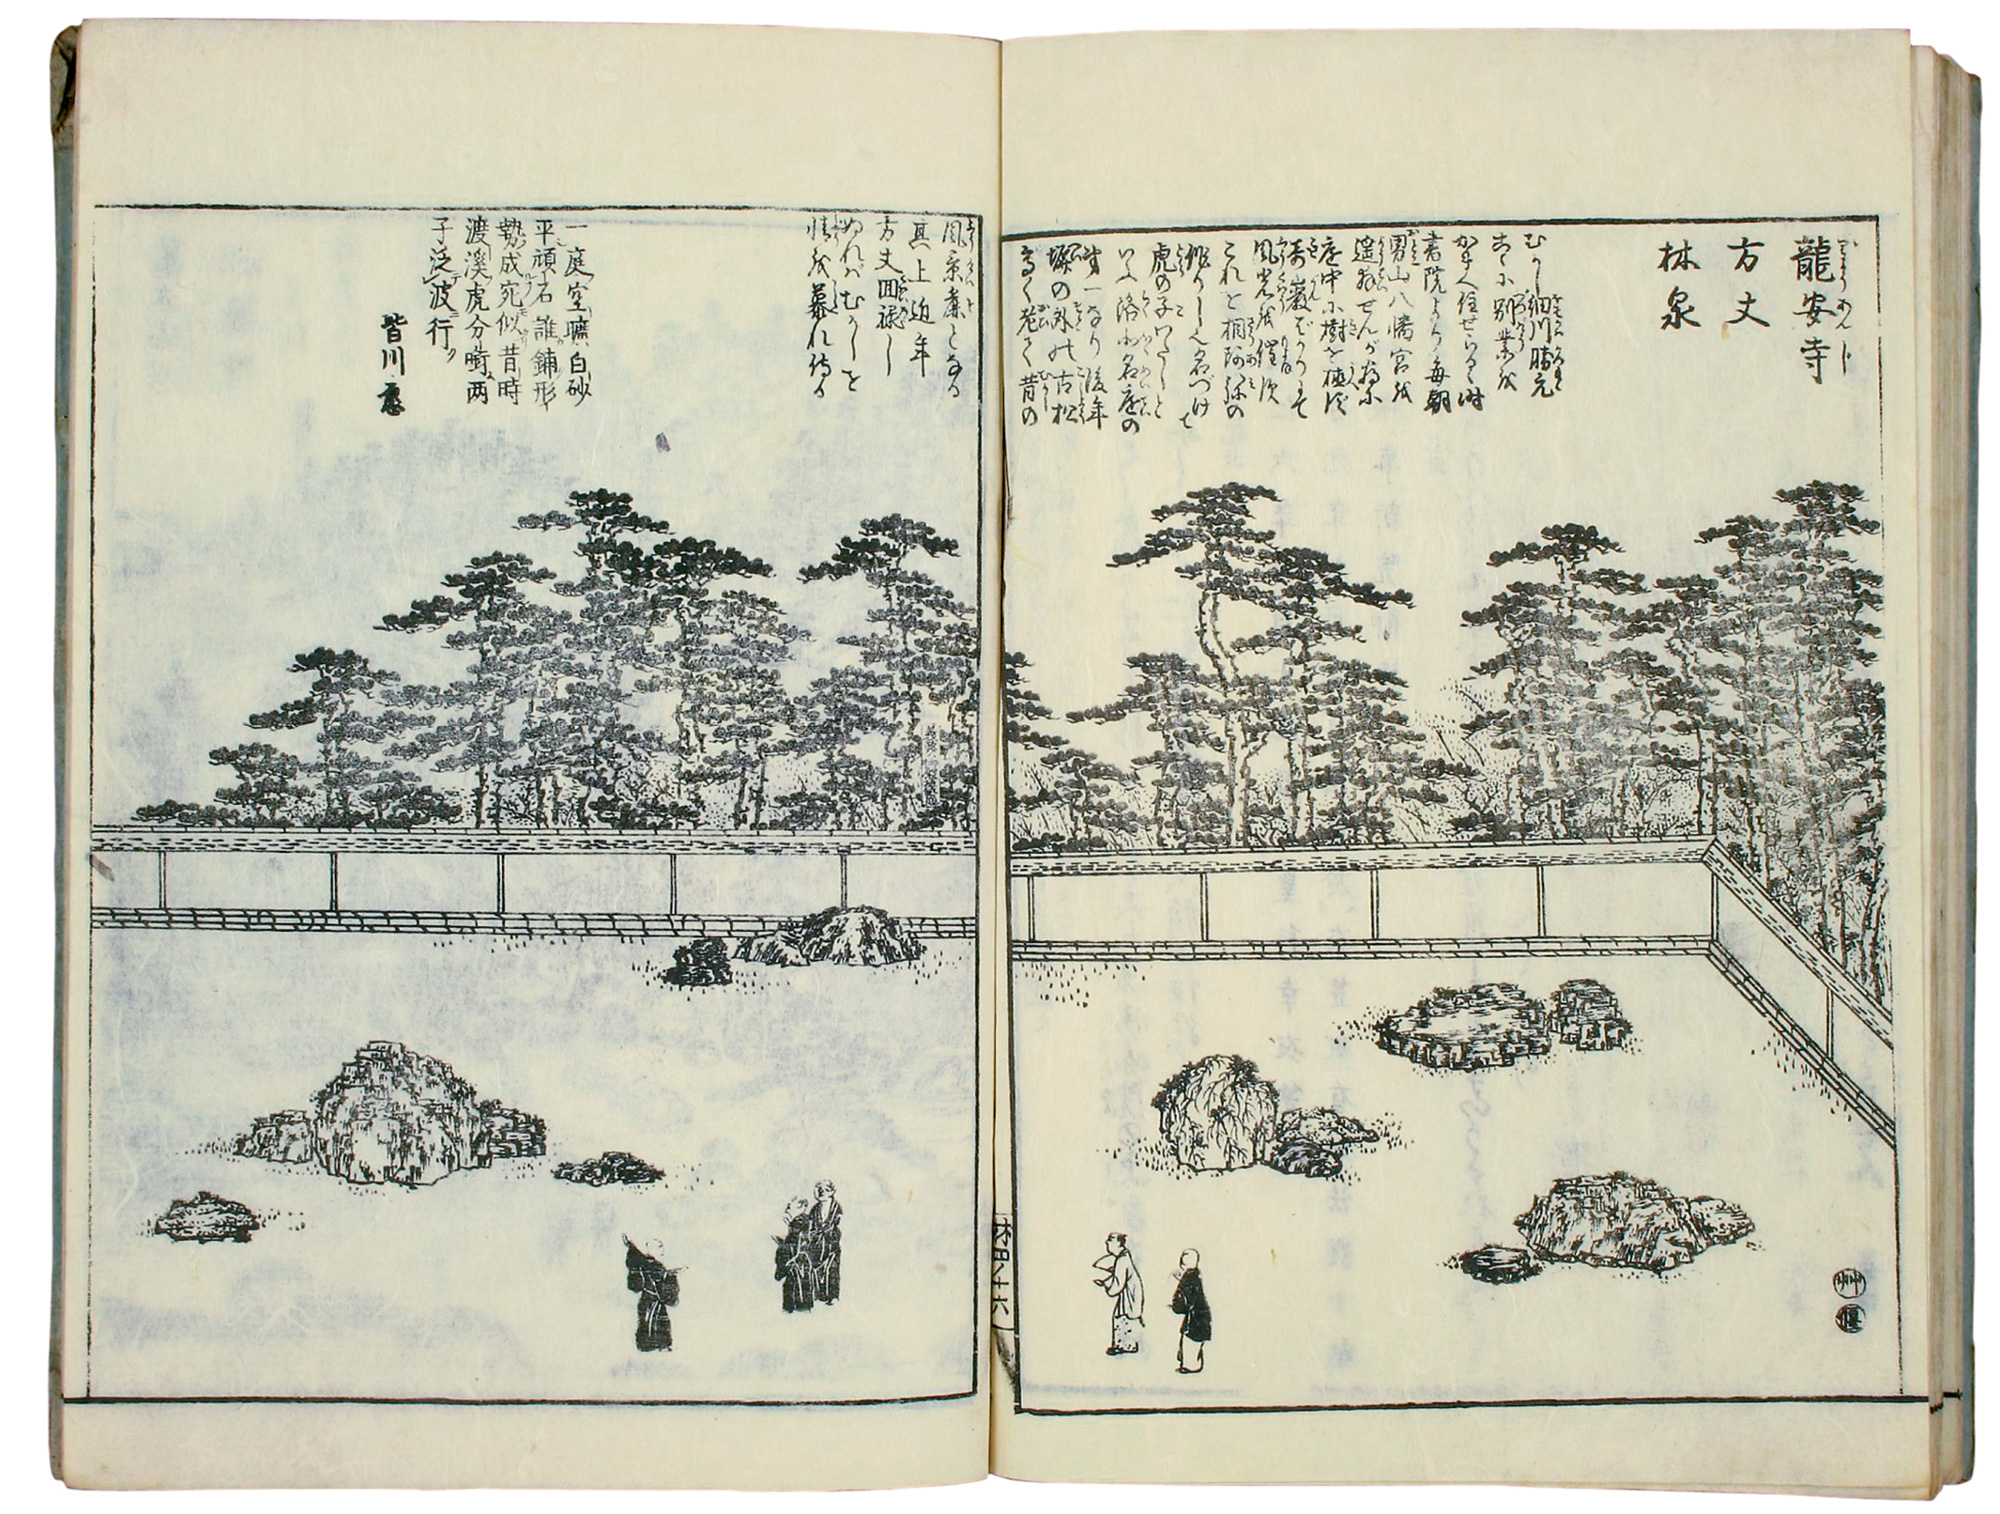 Ryōan-ji as it appears in Miyako rinsen meishō zue (Illustrated Guide to Celebrated Gardens in the Capital), 1799.